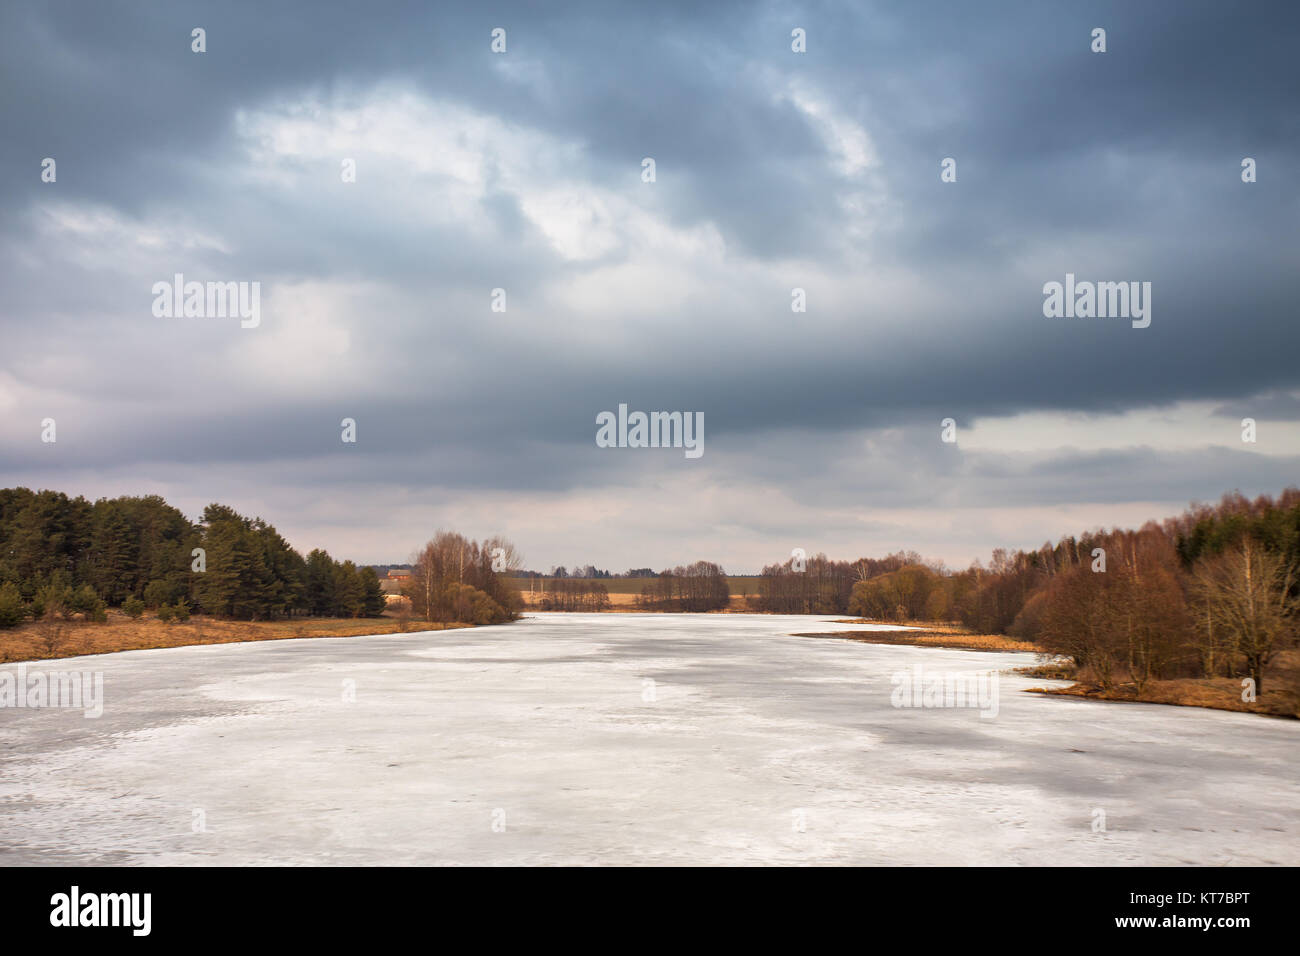 Spring rural scene. Lake under ice and snow melting. Cloudy spring day Stock Photo